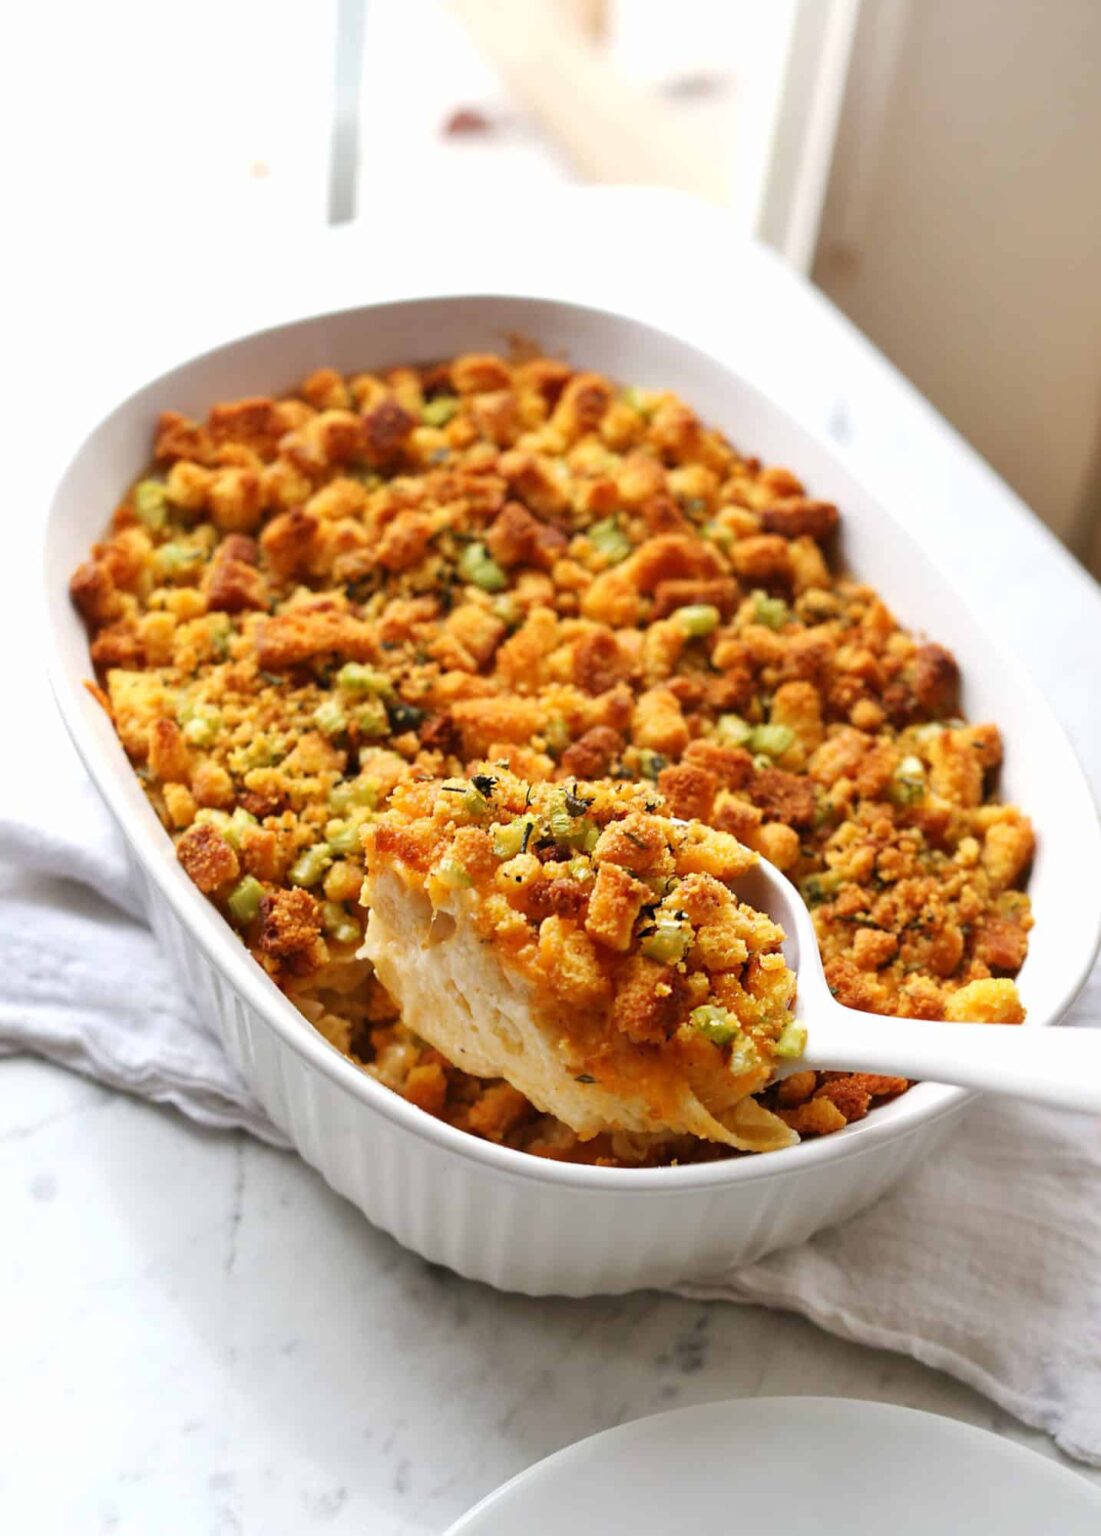 30 Macaroni and Cheese Recipes - Family Favorite Dish